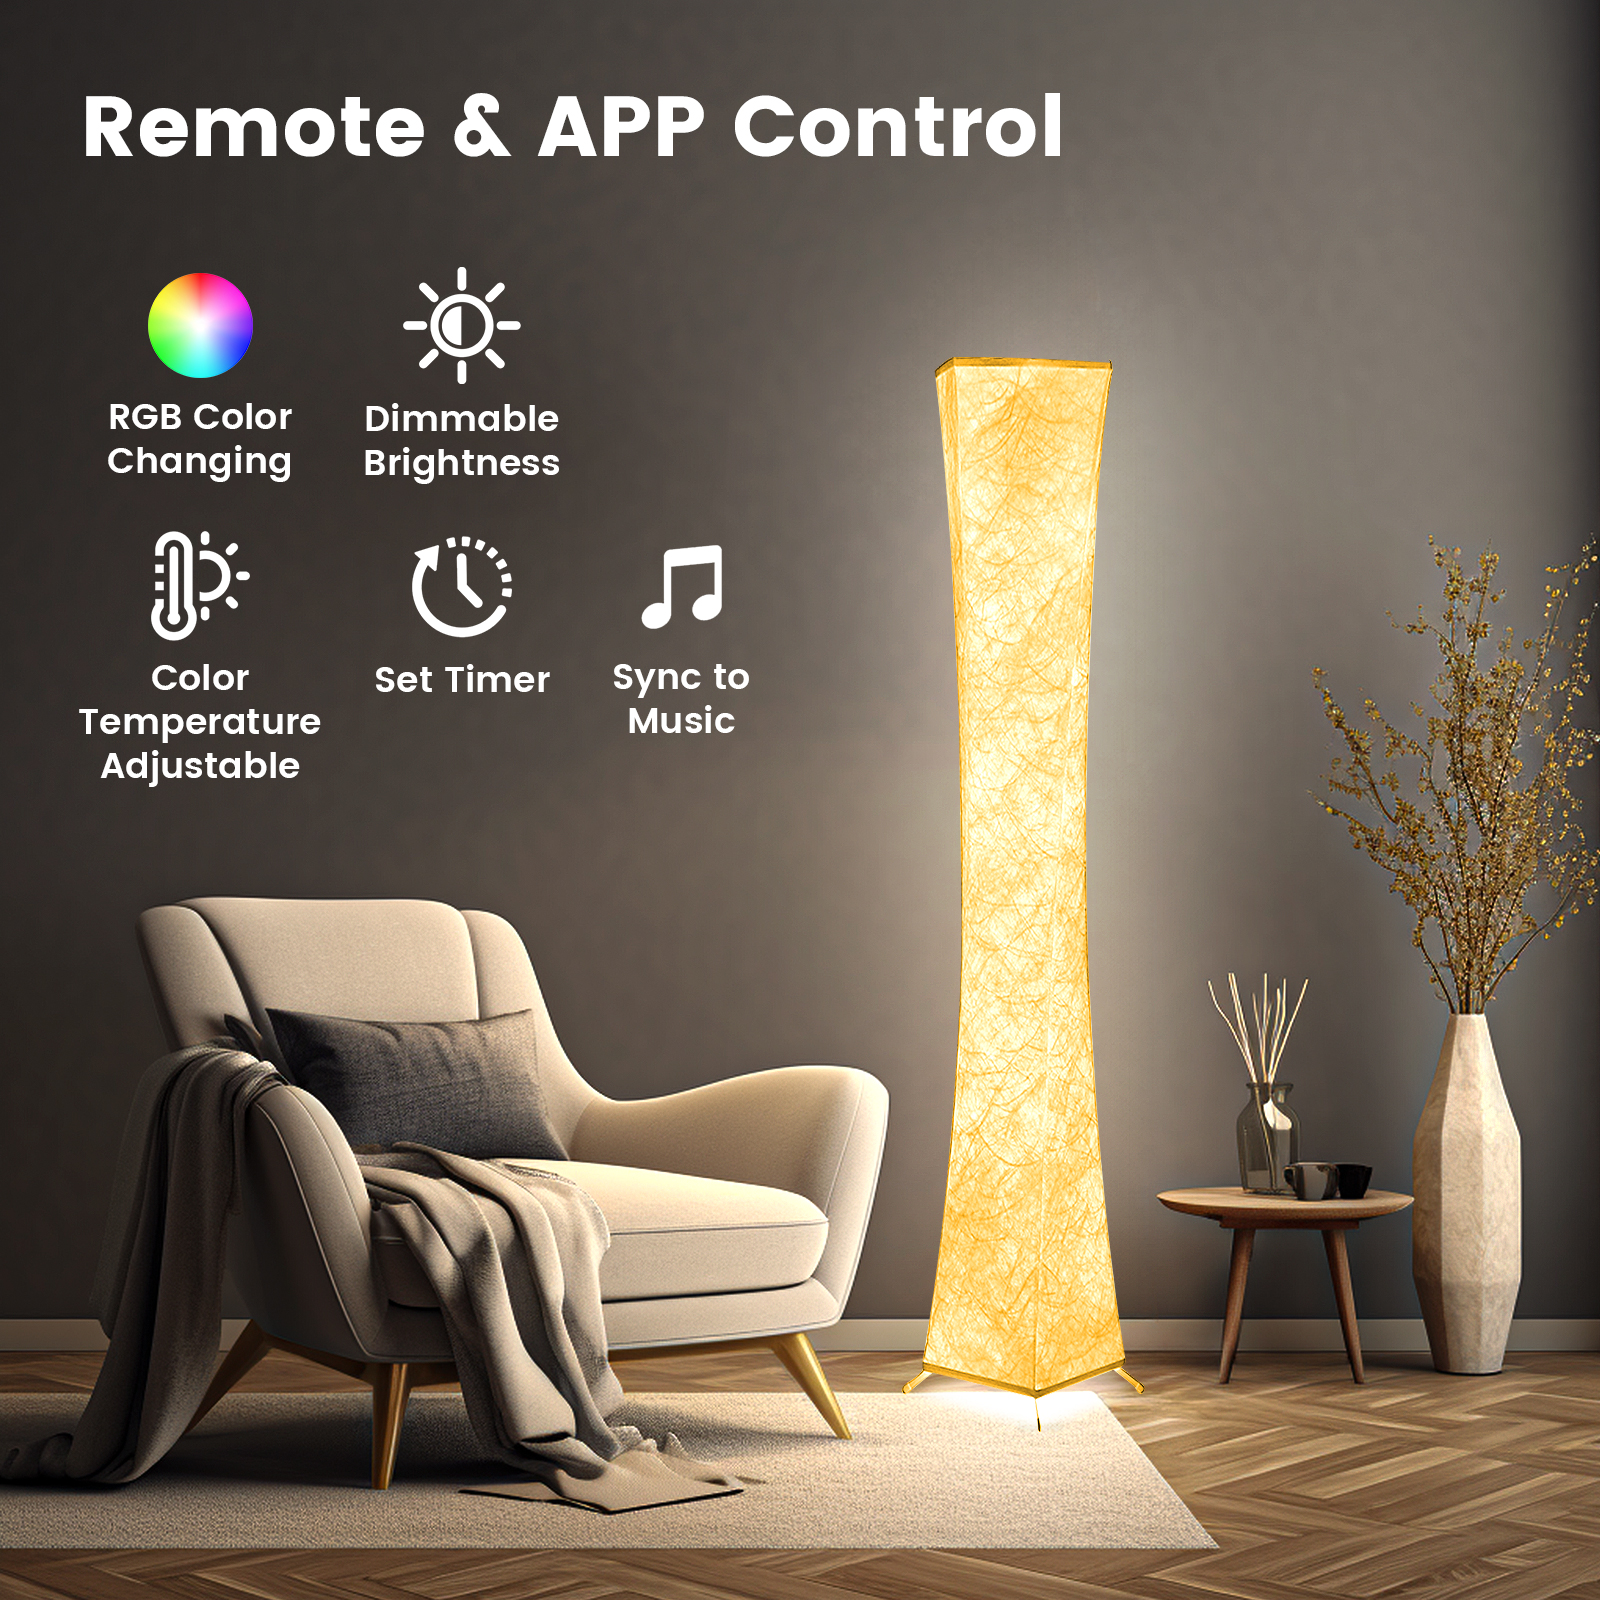 Soft Light LED Floor Lamp, RGB Color Changing Dimmable 61'' Tall Corner Lamps with Remote & Smart App Control, Music Sync, for Living Room Bedroom Game Room, Square - image 3 of 9